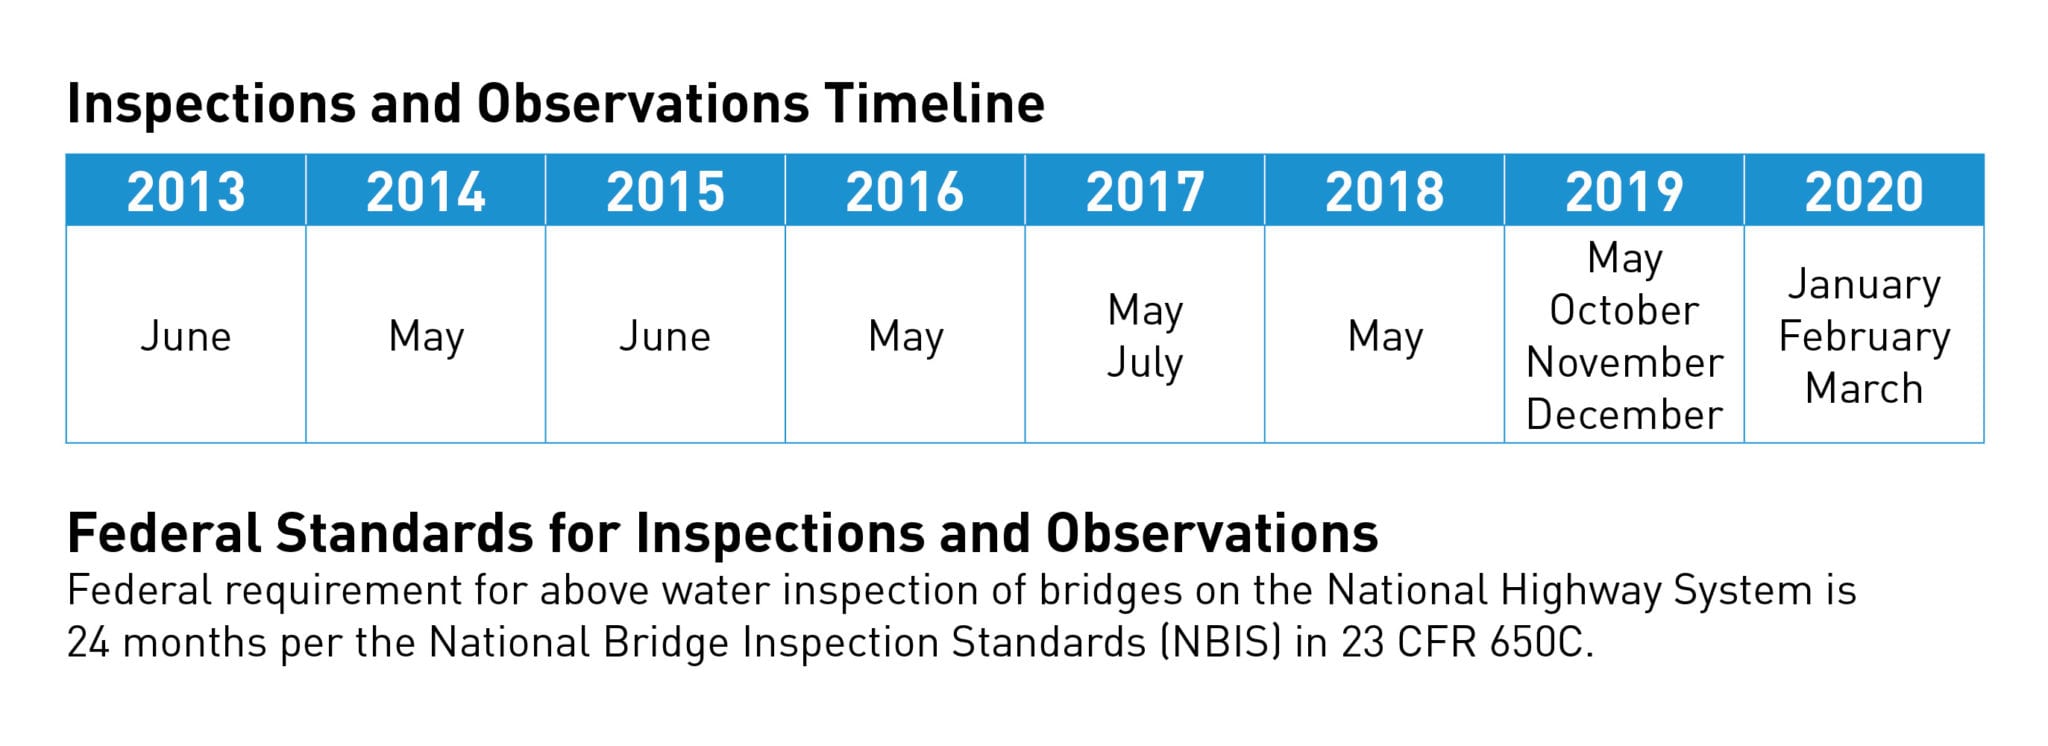 An inspection and Observations Timeline, displaying the years and months that a bridge is inspected. 